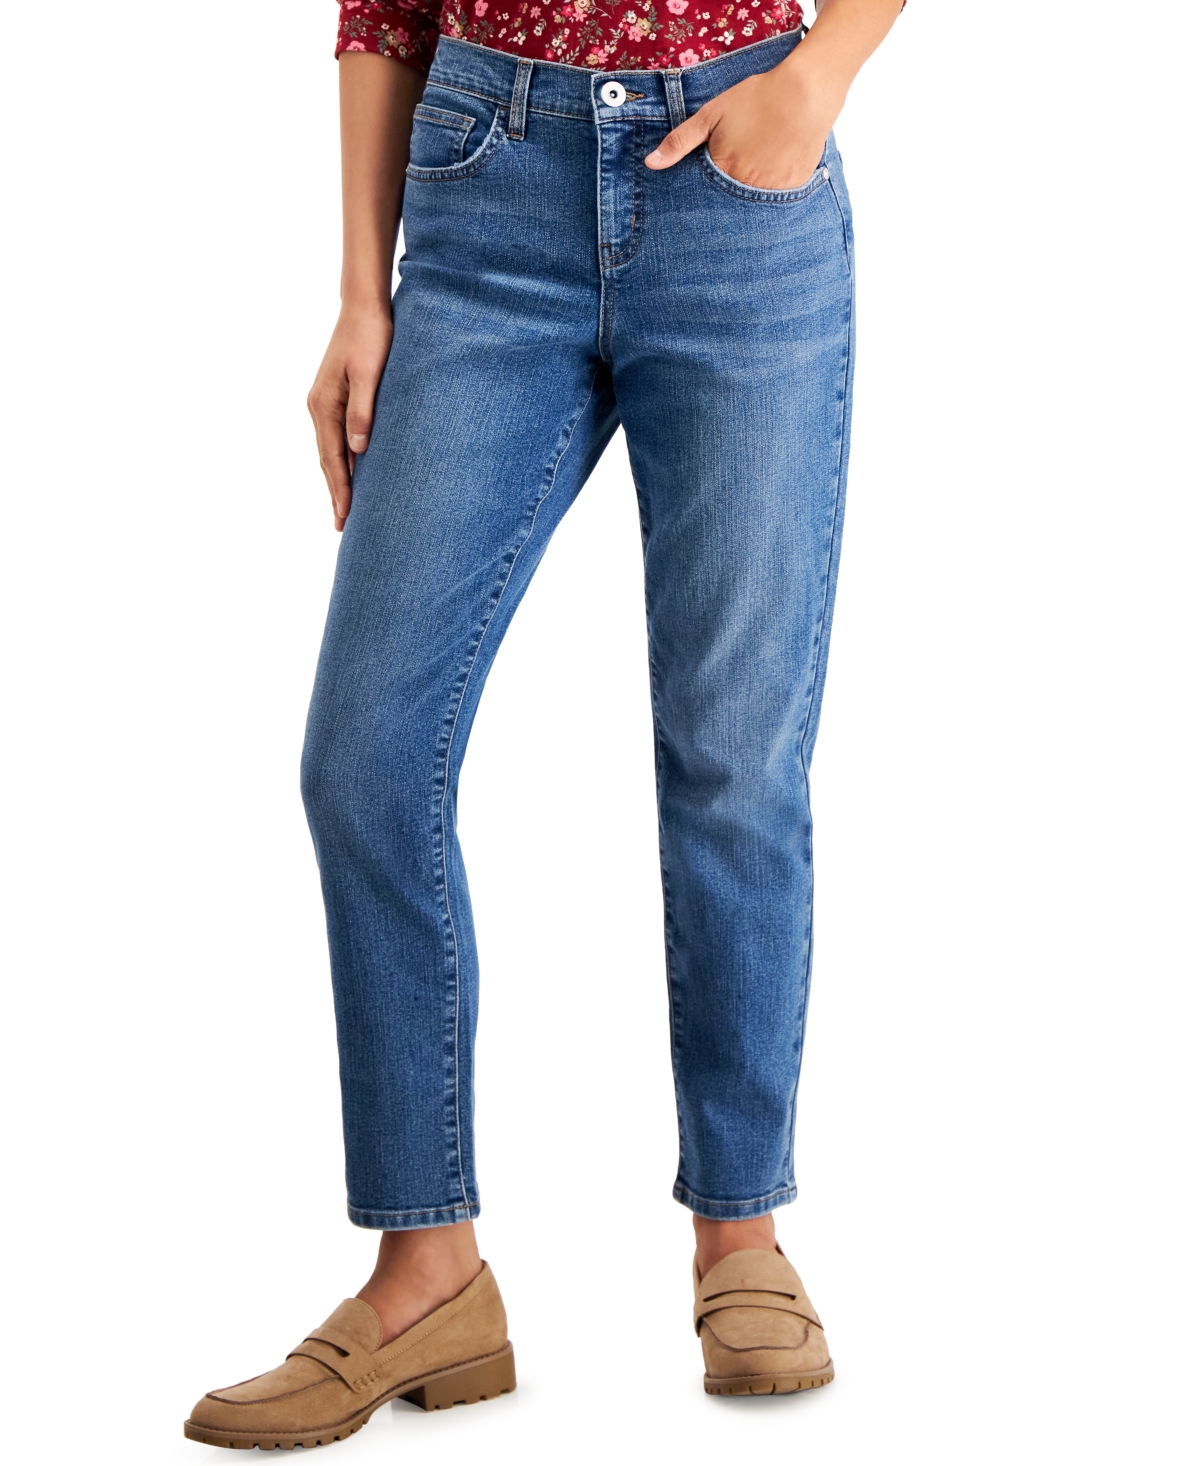 STYLE & CO PETITE MID RISE SLIM-LEG JEANS, CREATED FOR MACY'S